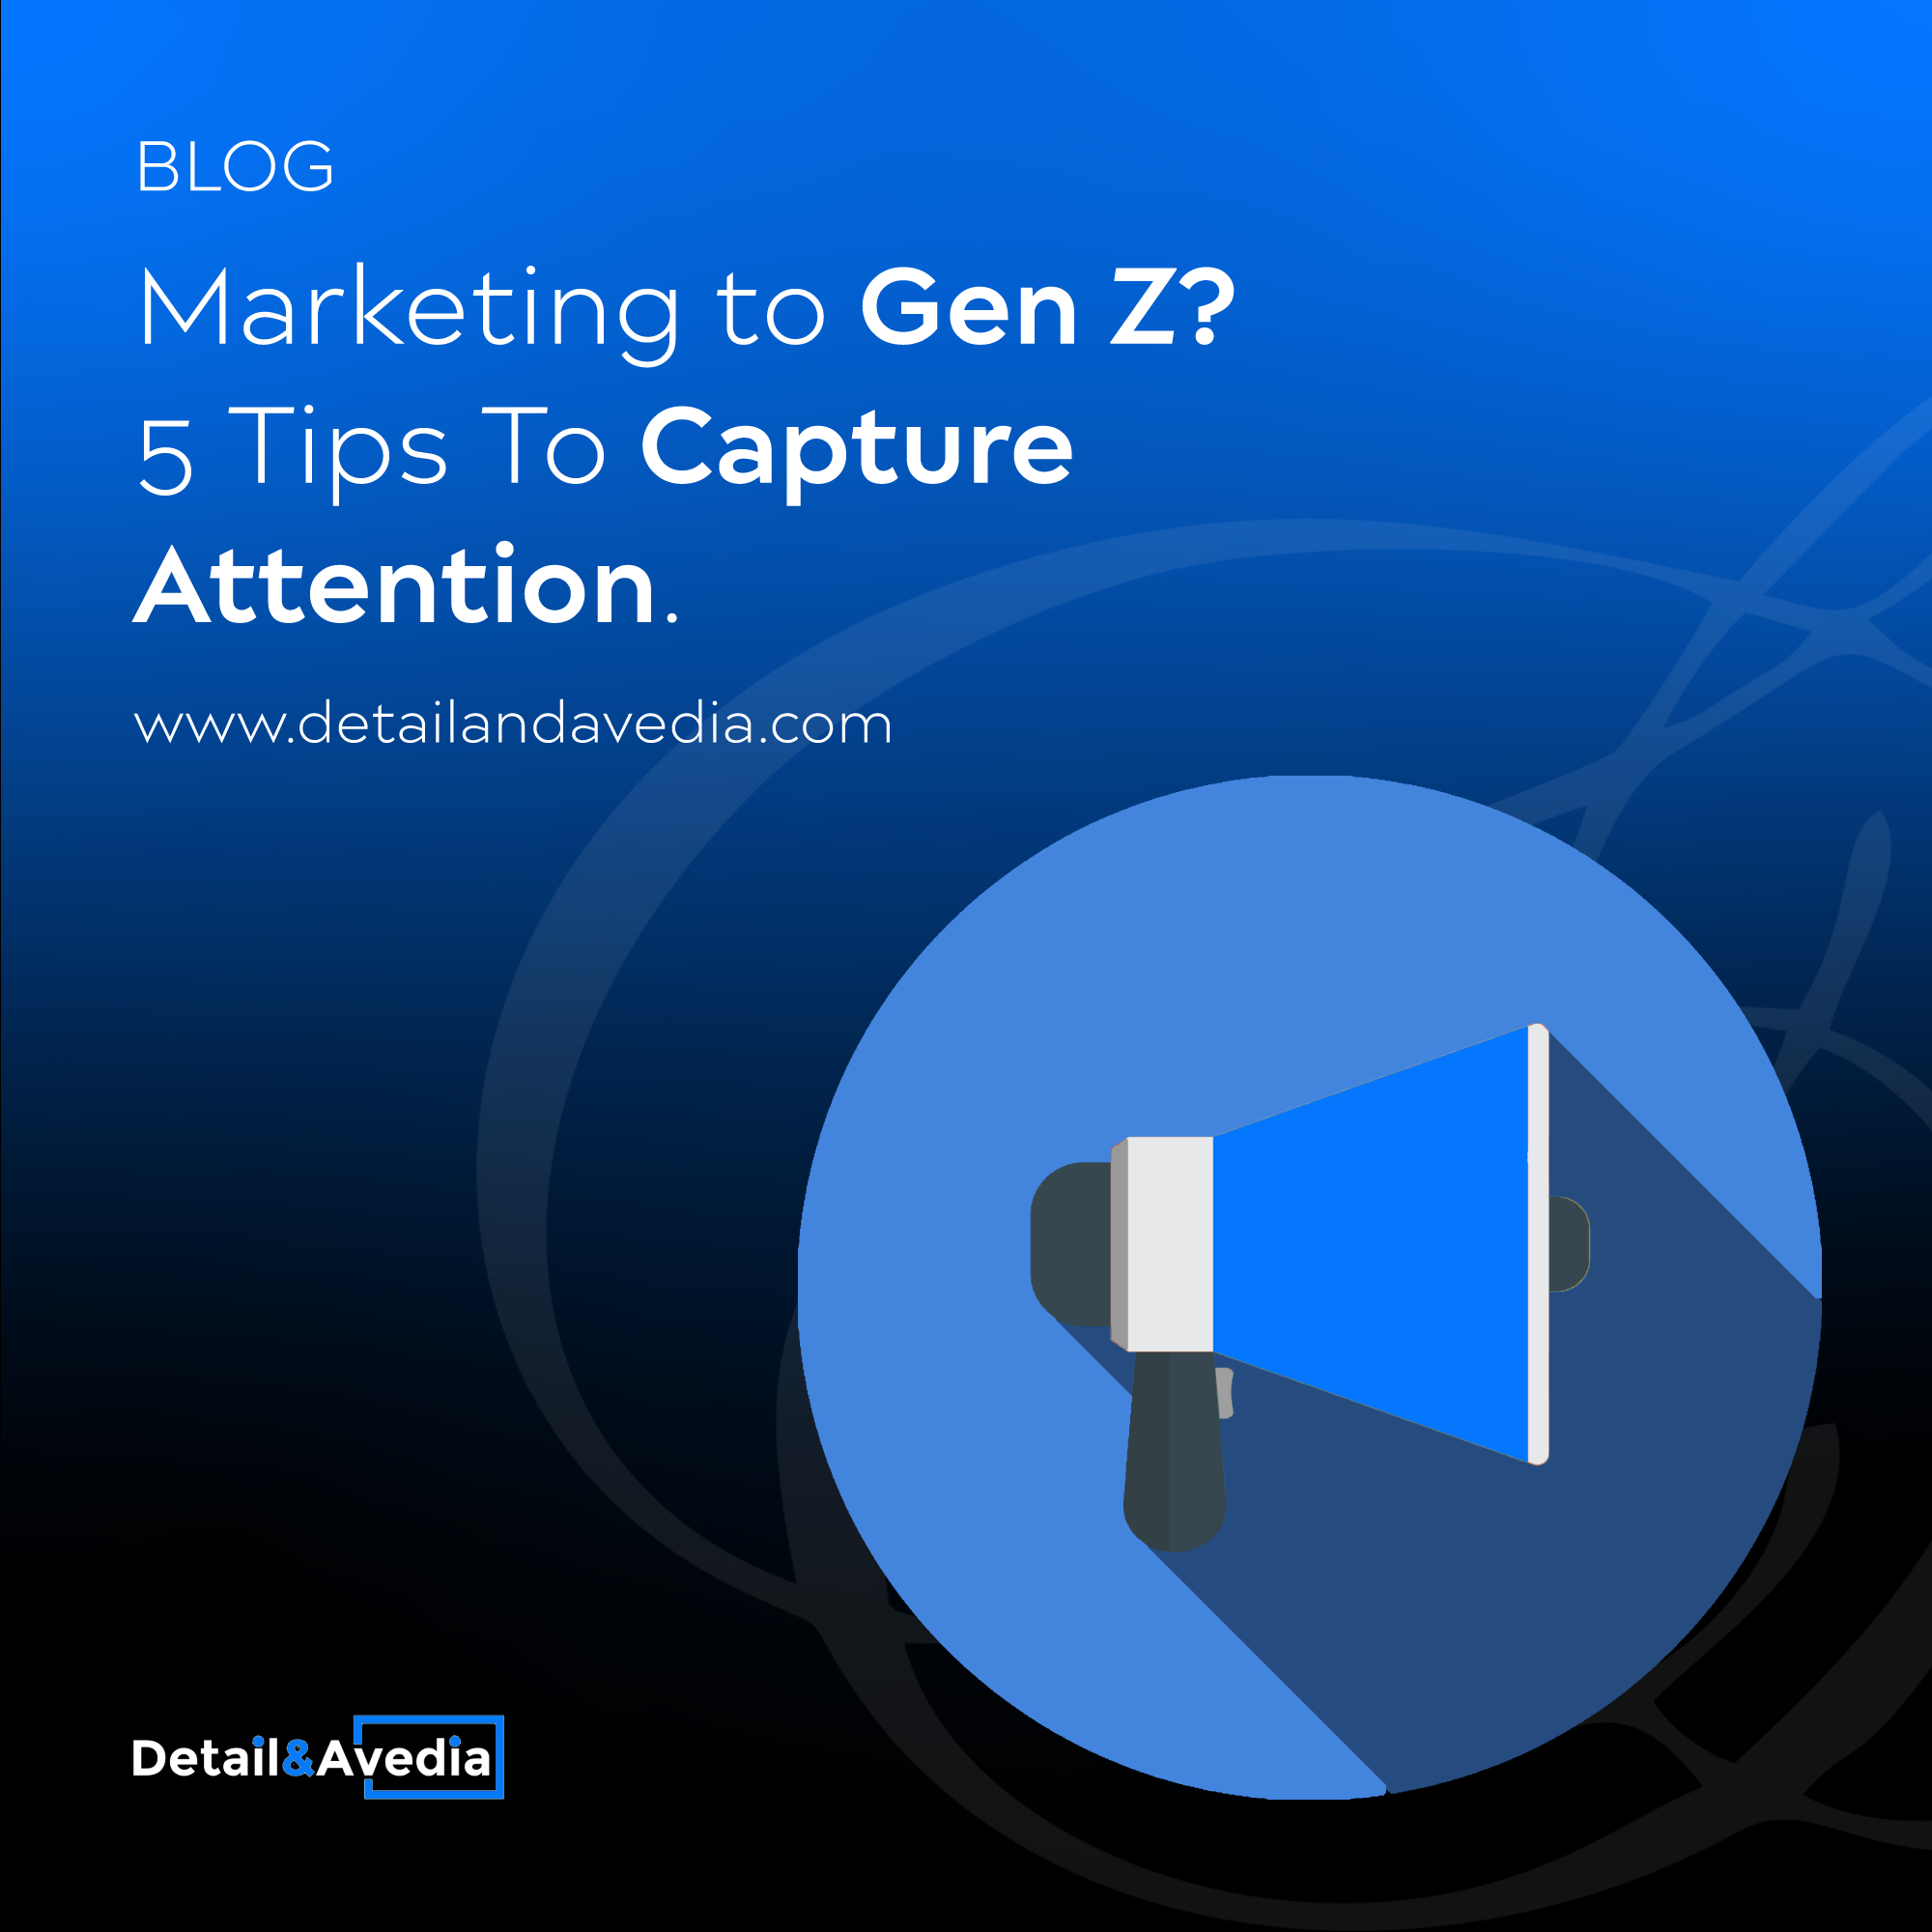 Marketing to Gen Z? 5 Tips To Capture Attention